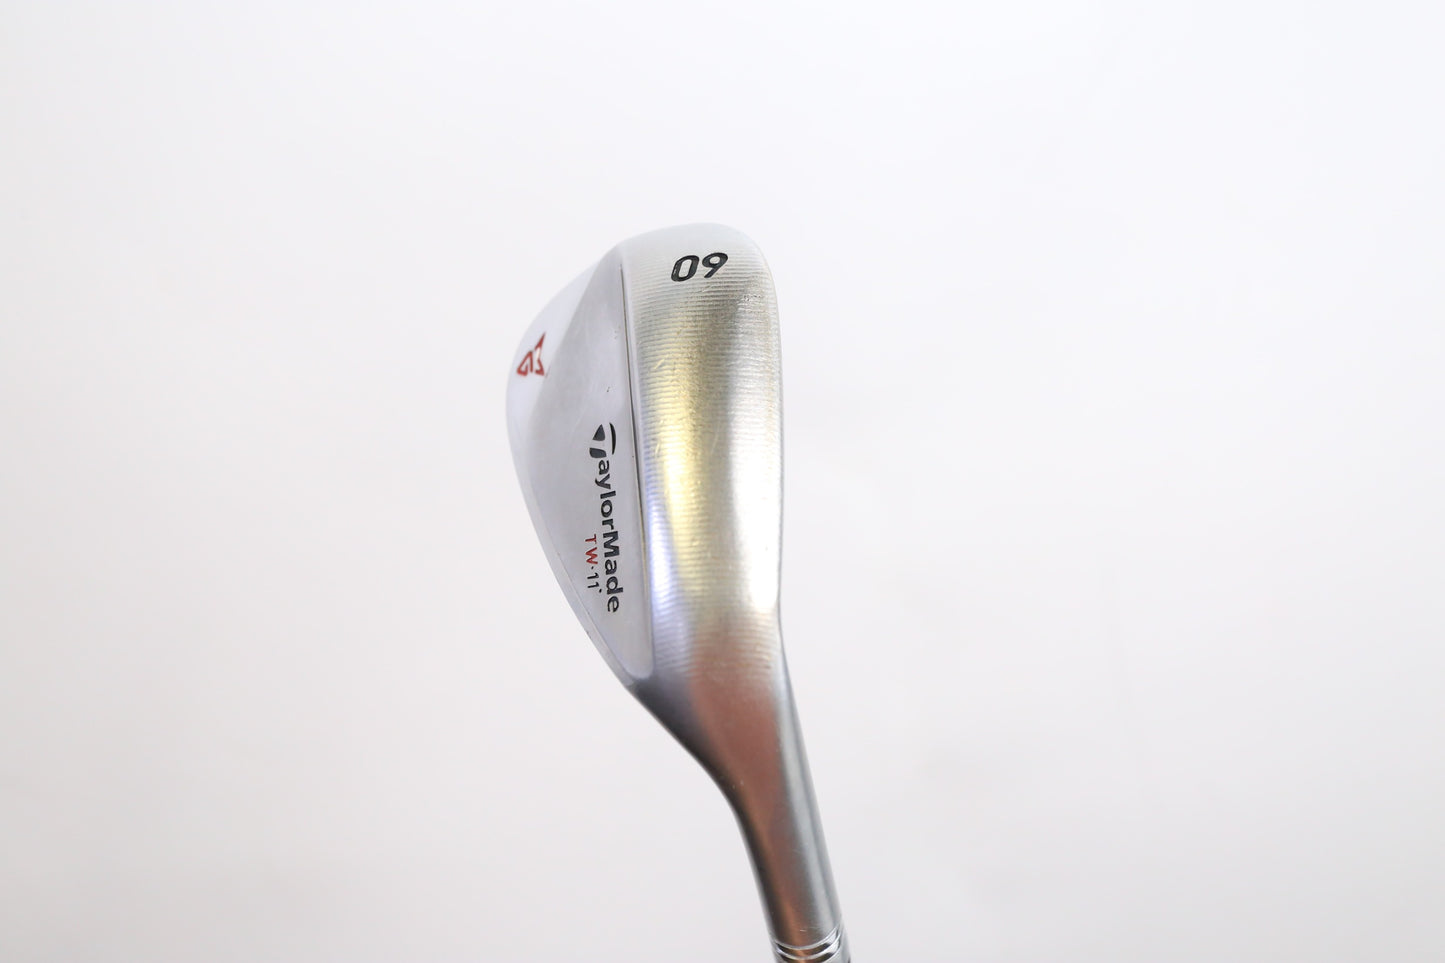 Used TaylorMade MG2 TW Lob Wedge - Right-Handed - 60 Degrees - Regular Flex